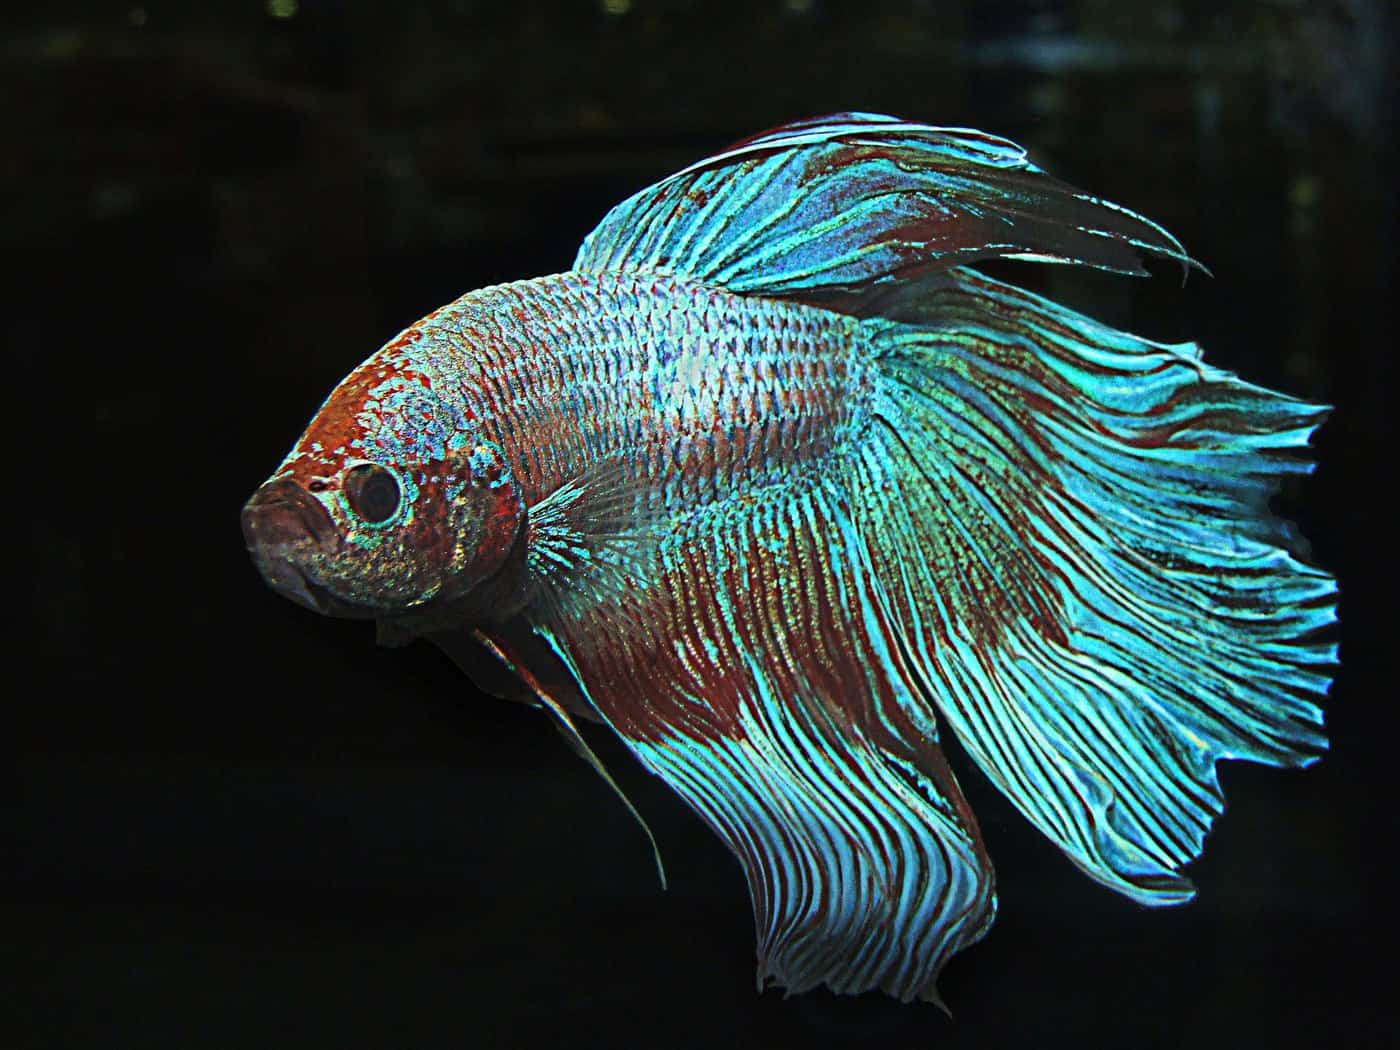 How often do you feed a betta fish for optimal health? - Fish Vet